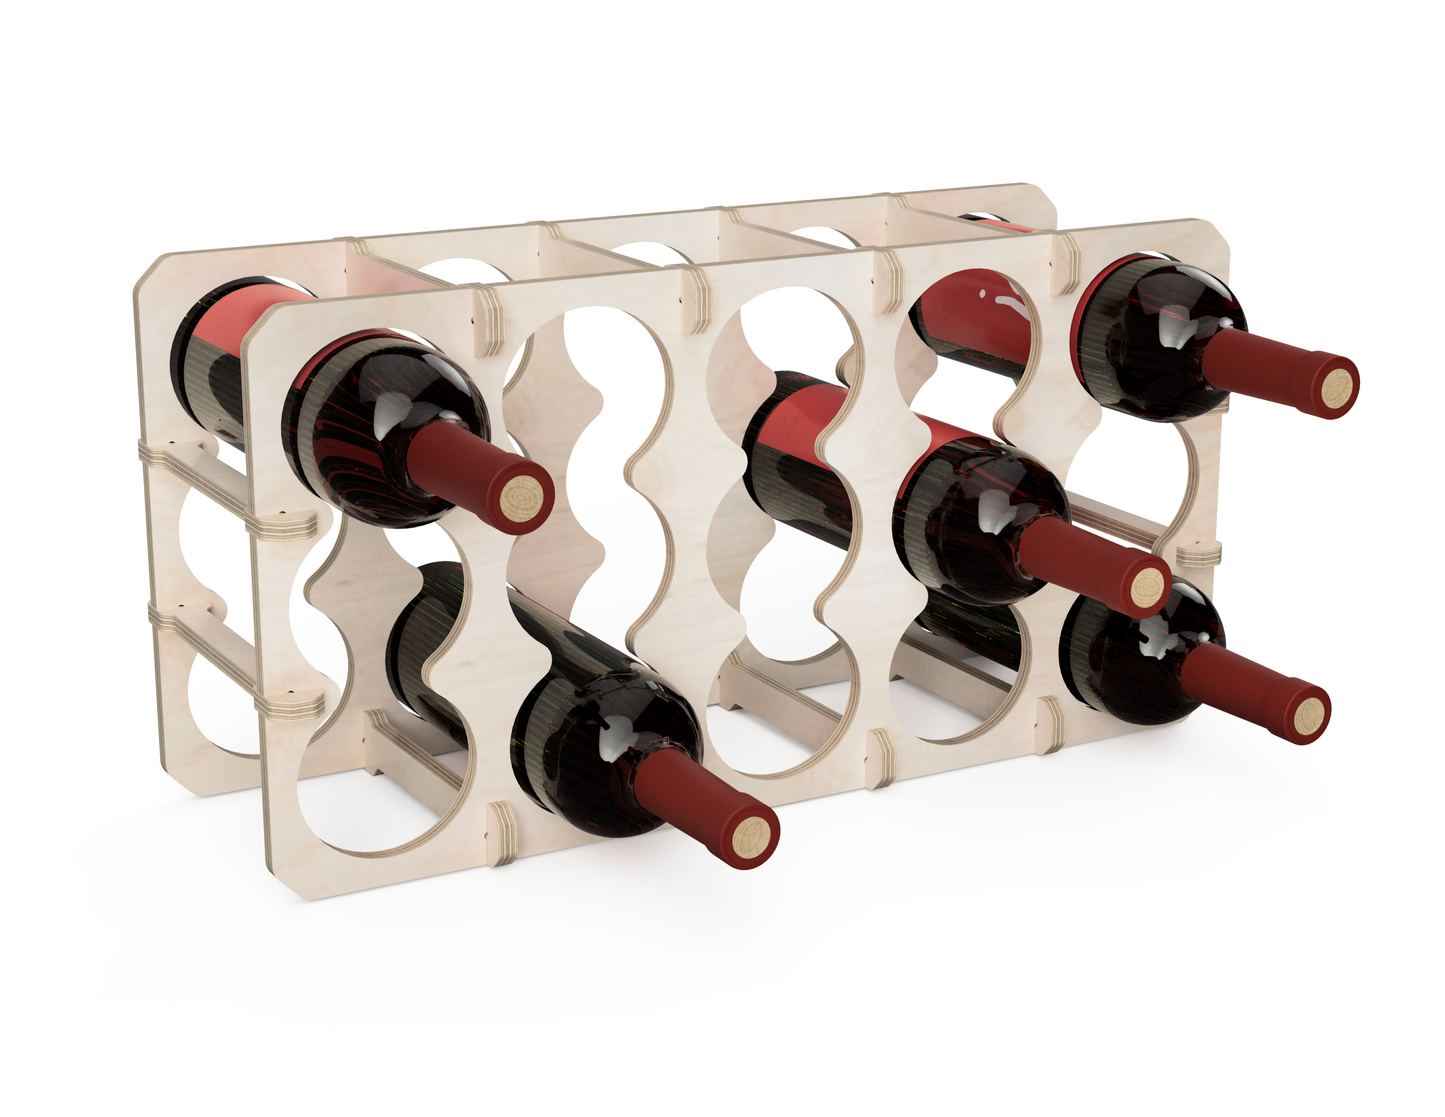 Wine bottle stand DXF file